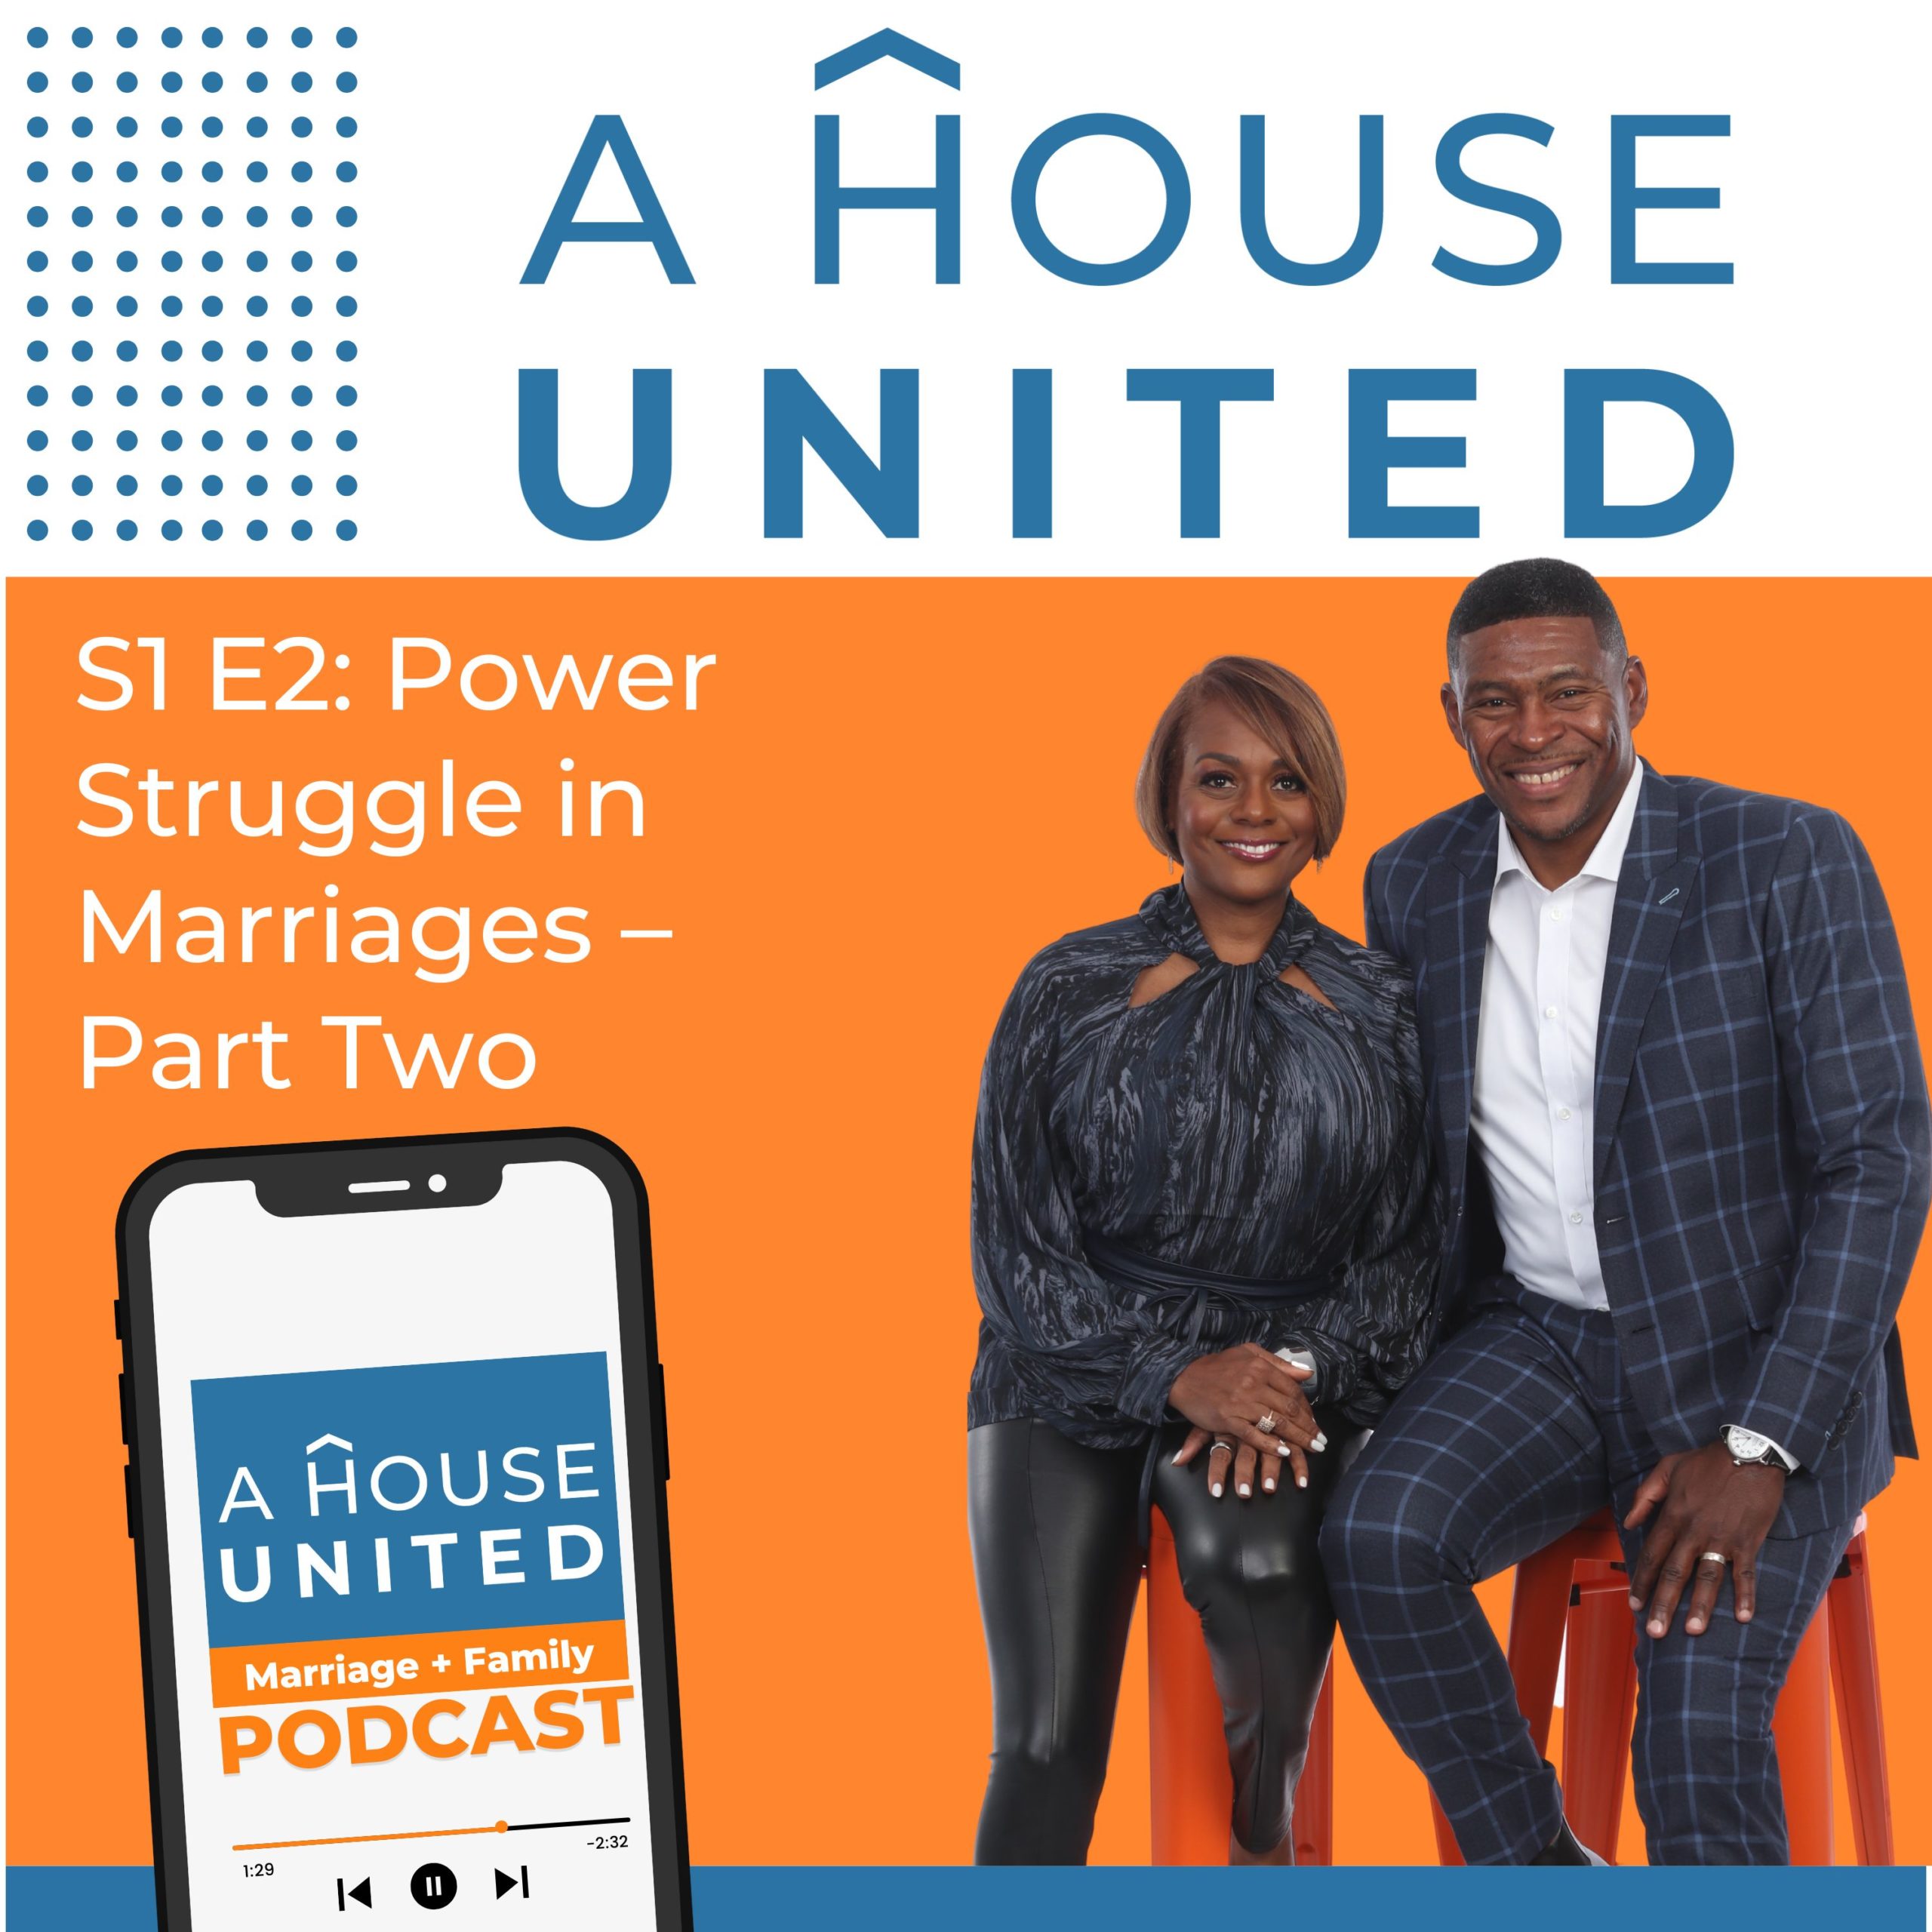 A House United S1 E2: Power Struggle in Marriages – Part Two